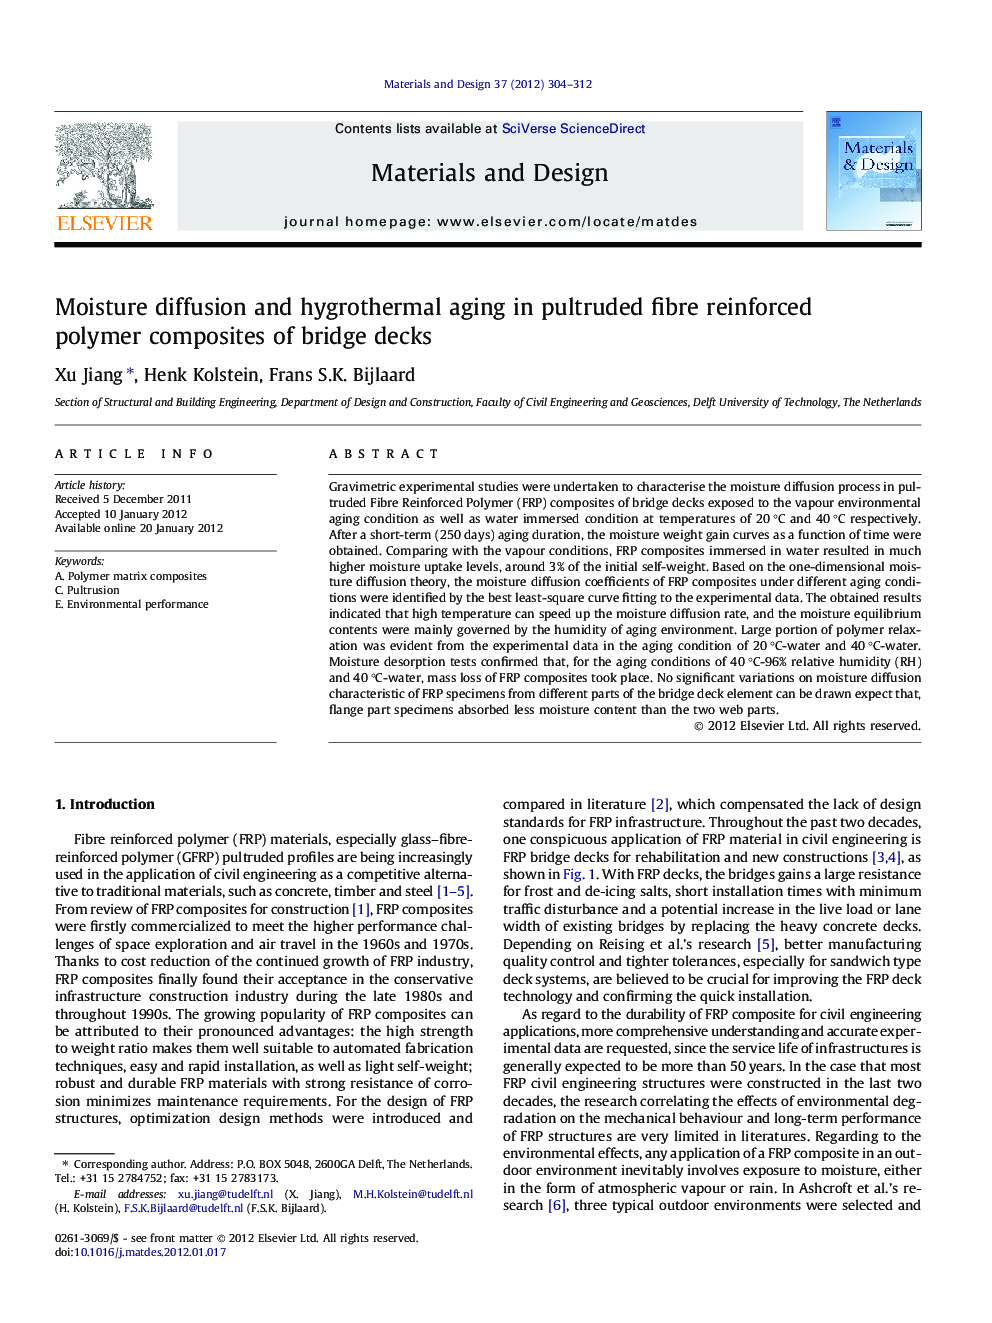 Moisture diffusion and hygrothermal aging in pultruded fibre reinforced polymer composites of bridge decks